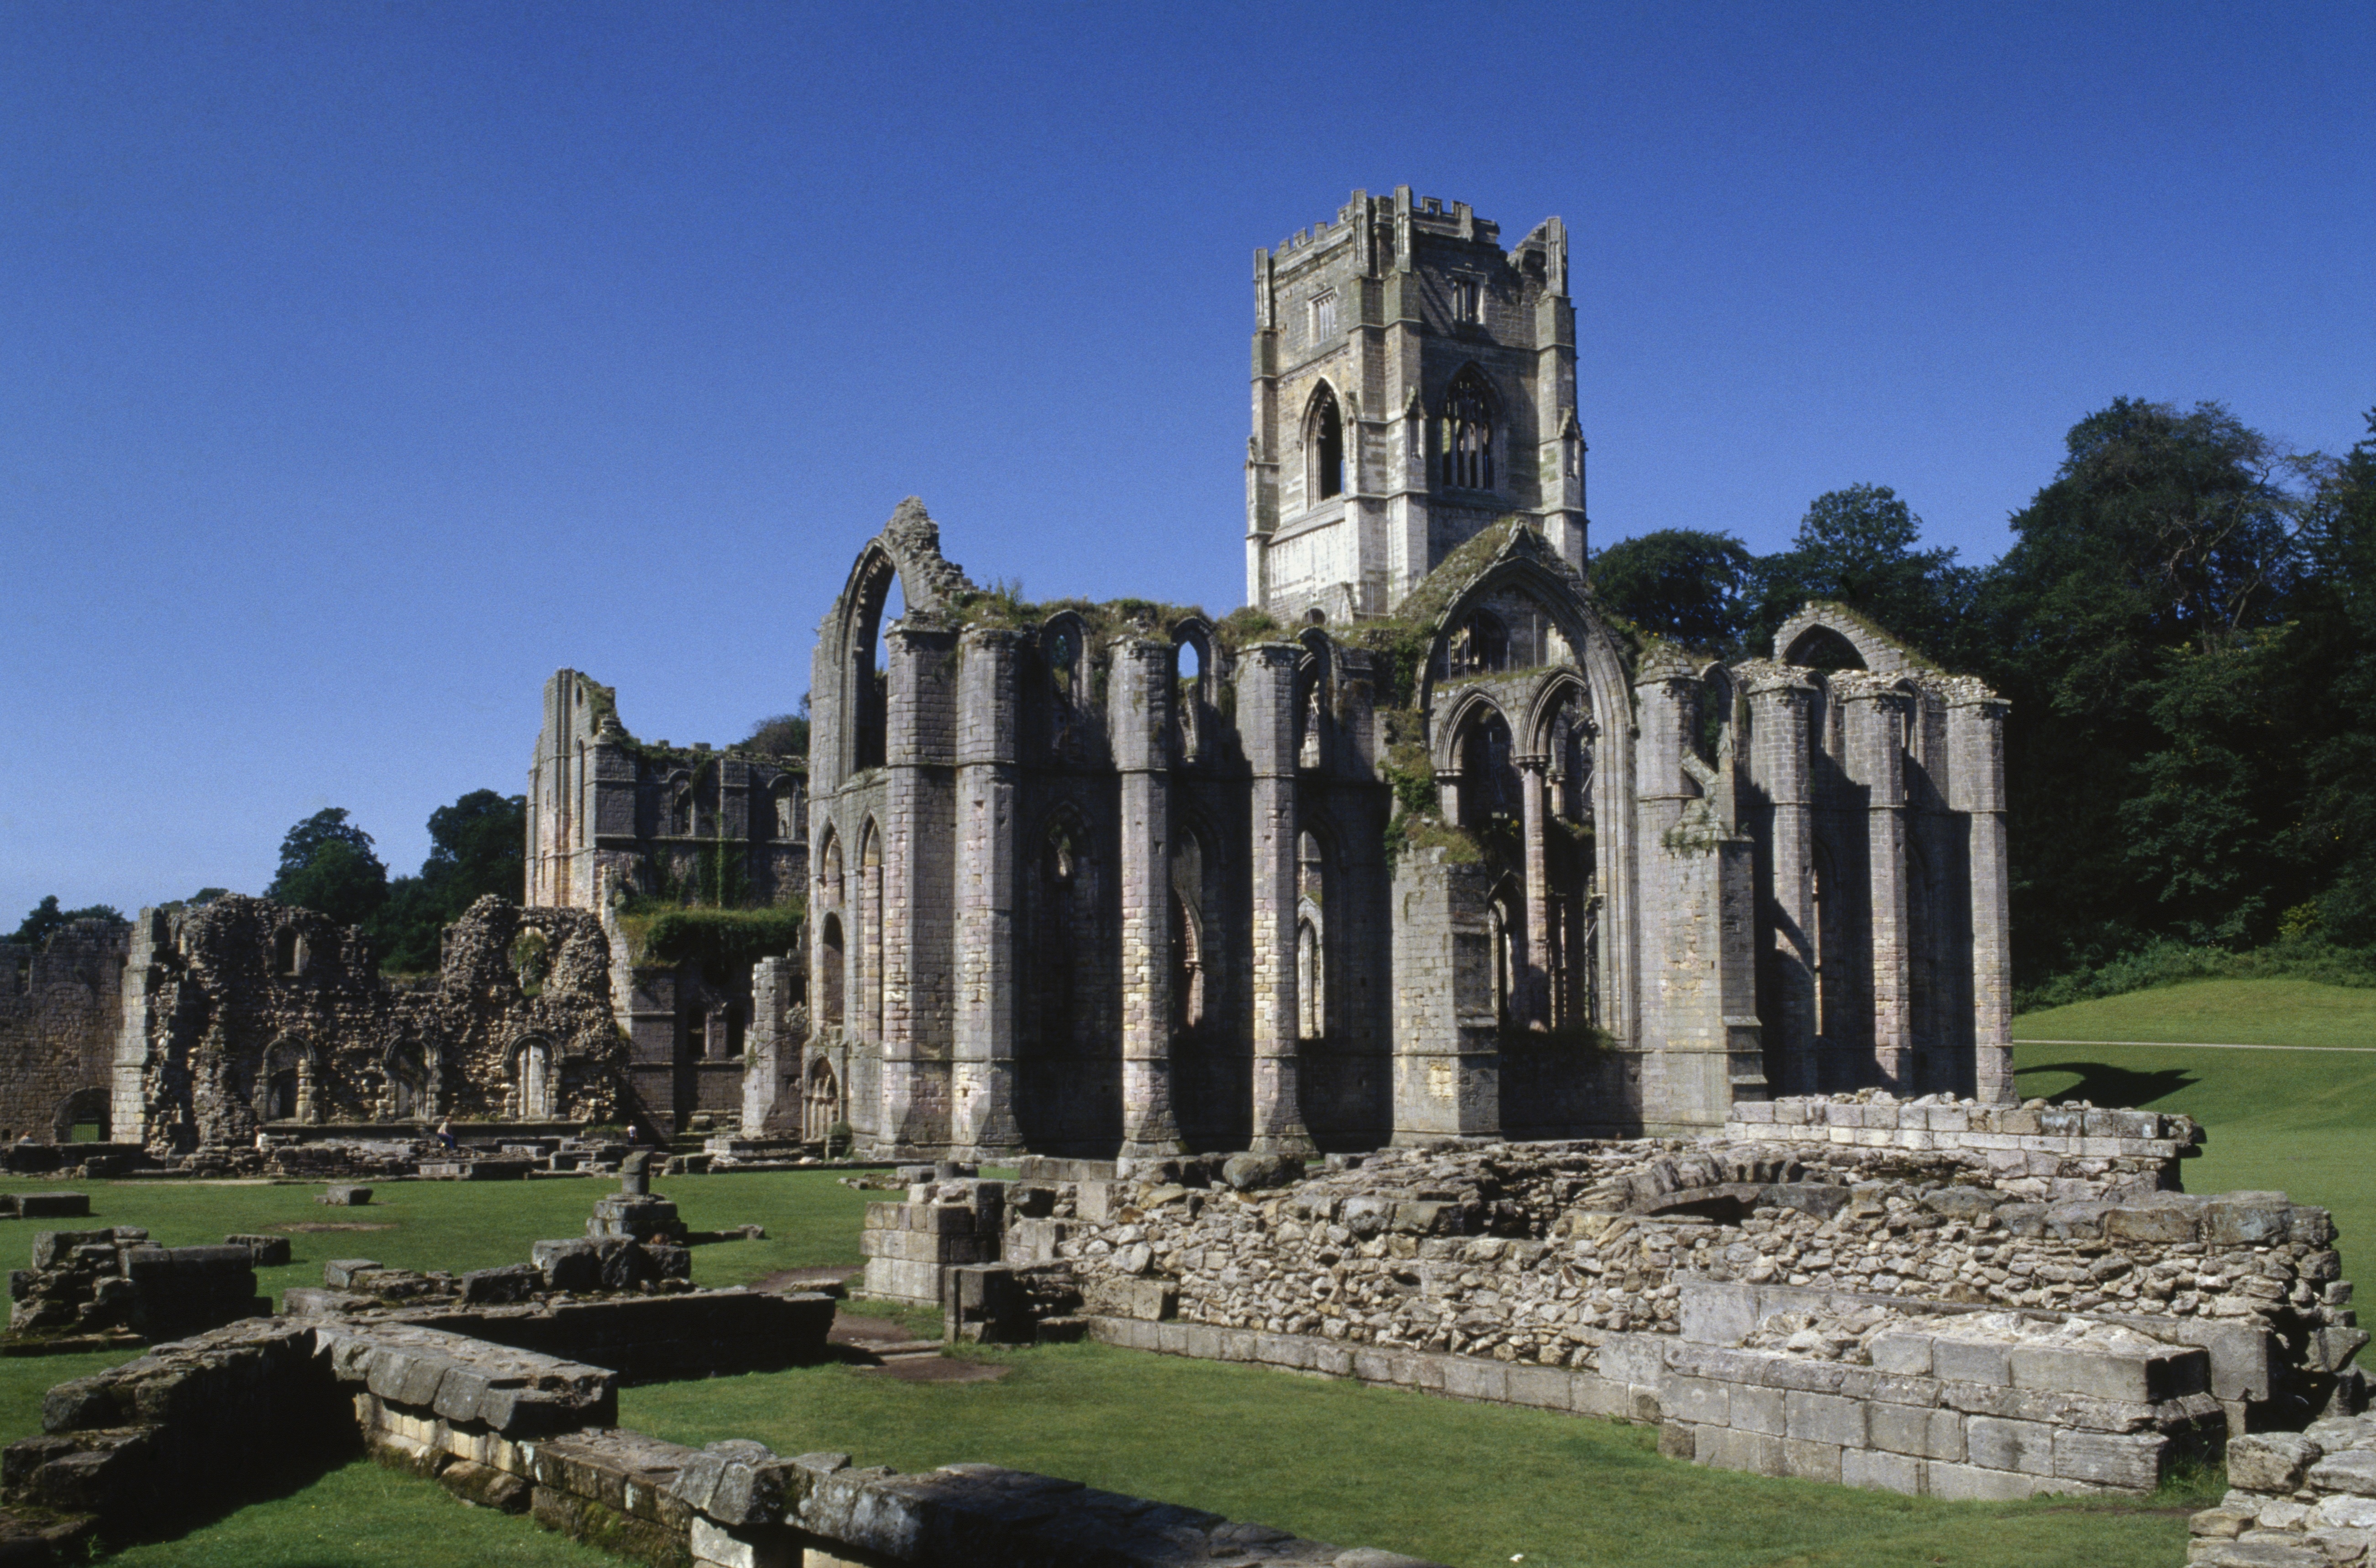 The ruins of Fountains Abbey, Cistercian Abbey, Studley Royal Park in England, United Kingdom. | Source: Getty Images